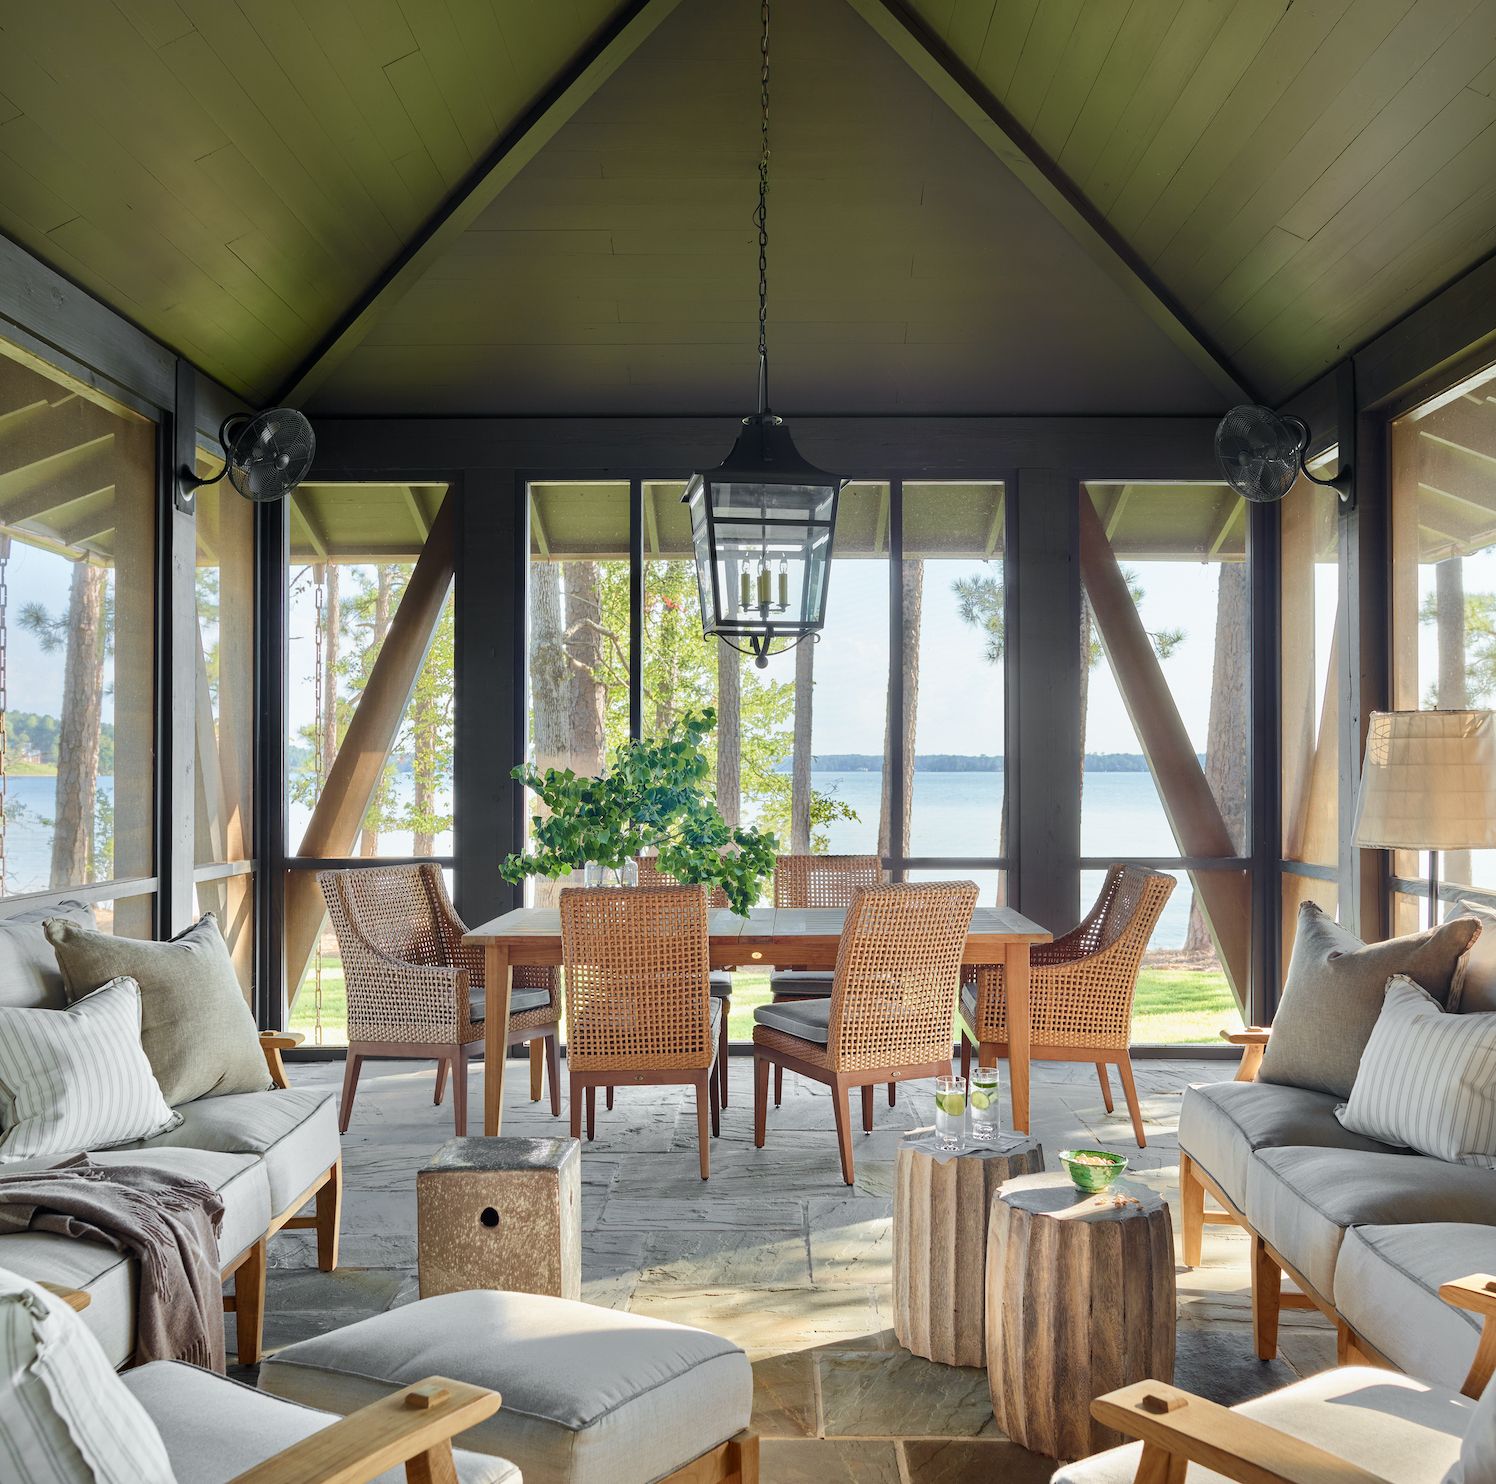 A Lakefront Retreat in Alabama Gets a Thoughtful Makeover for an Expanding Family